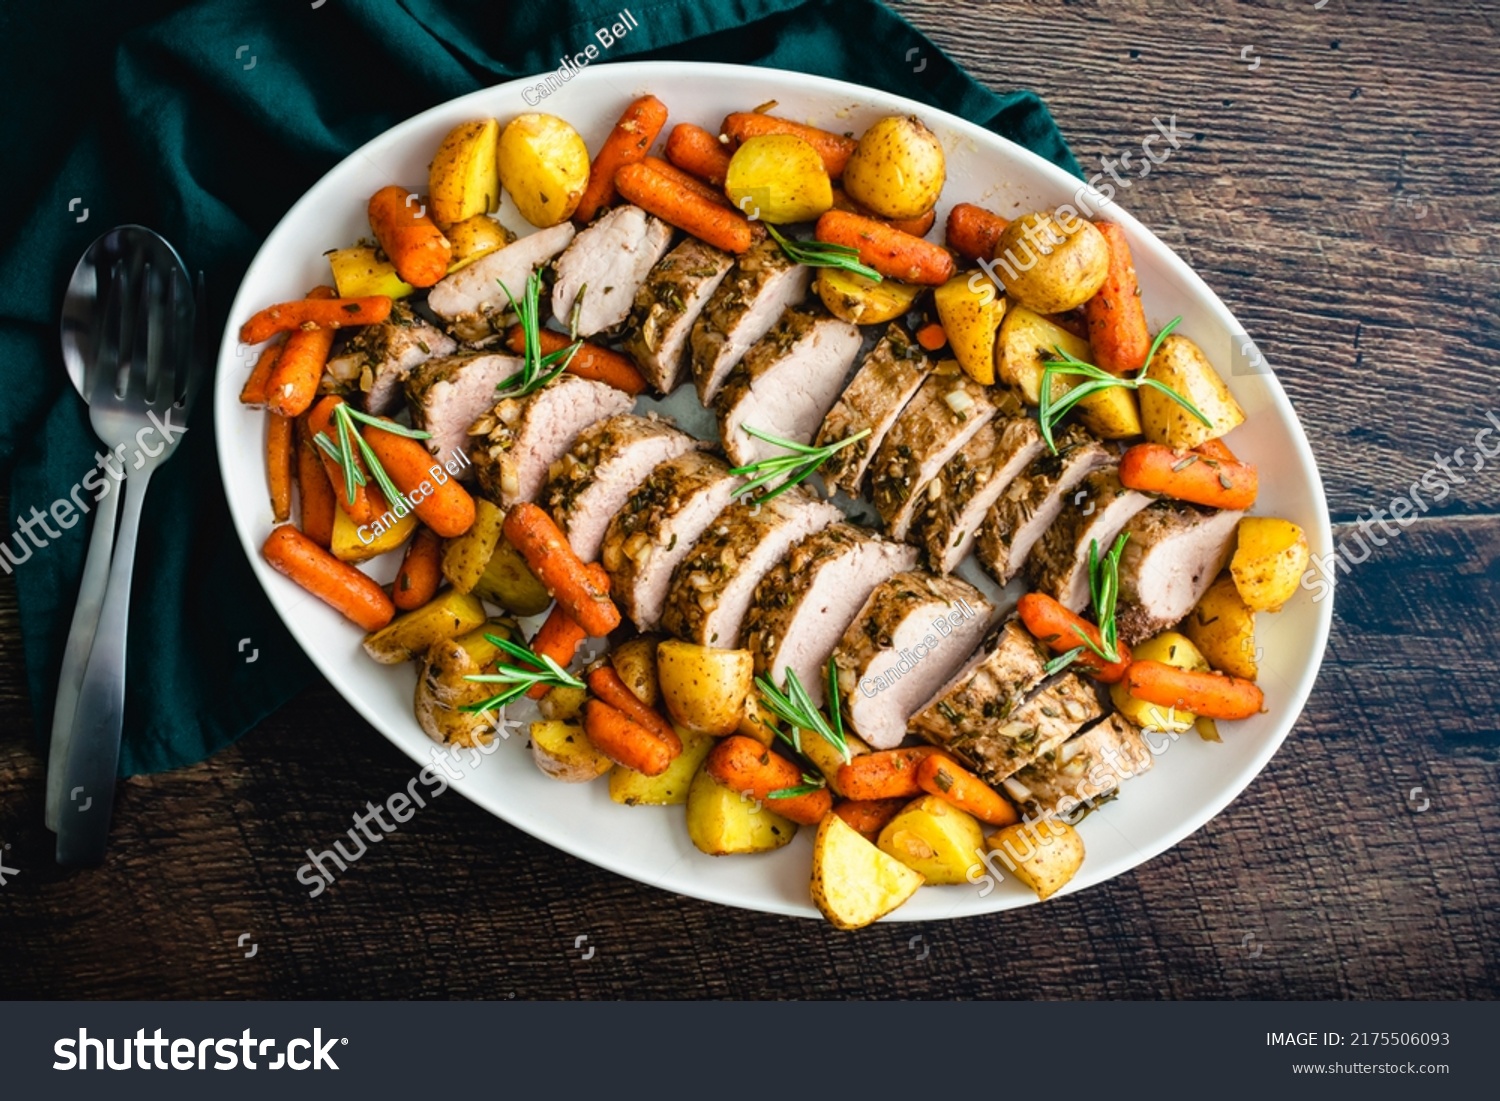 Roast Pork Tenderloin with Potatoes and Baby Carrots: Sliced pork medallions surrounded with vegetables on a platter #2175506093